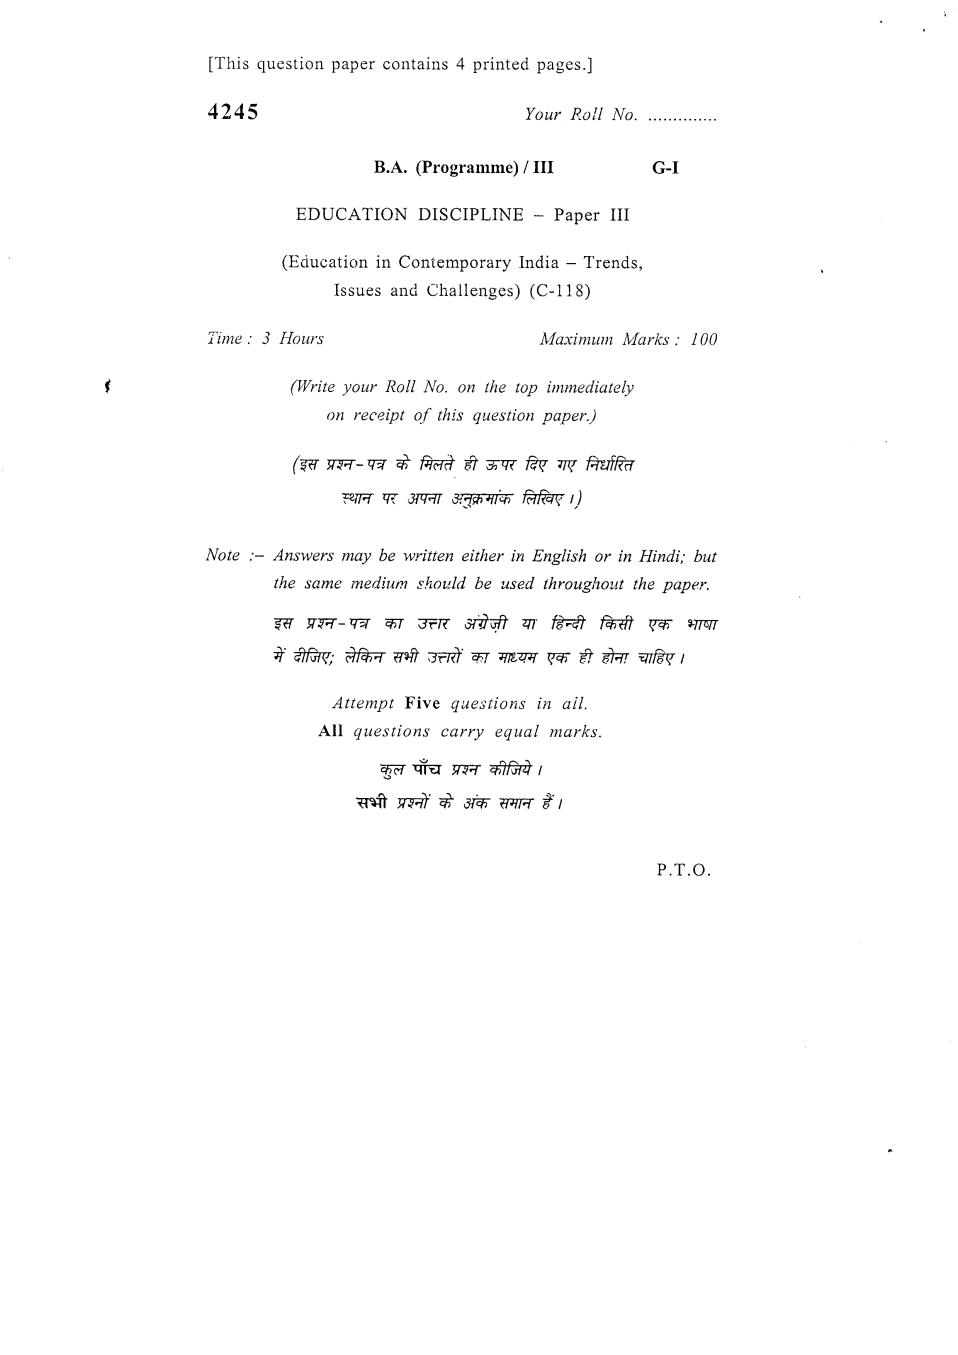 DU SOL Question Paper 2018 BA Education - Education In Contemporary India - Page 1